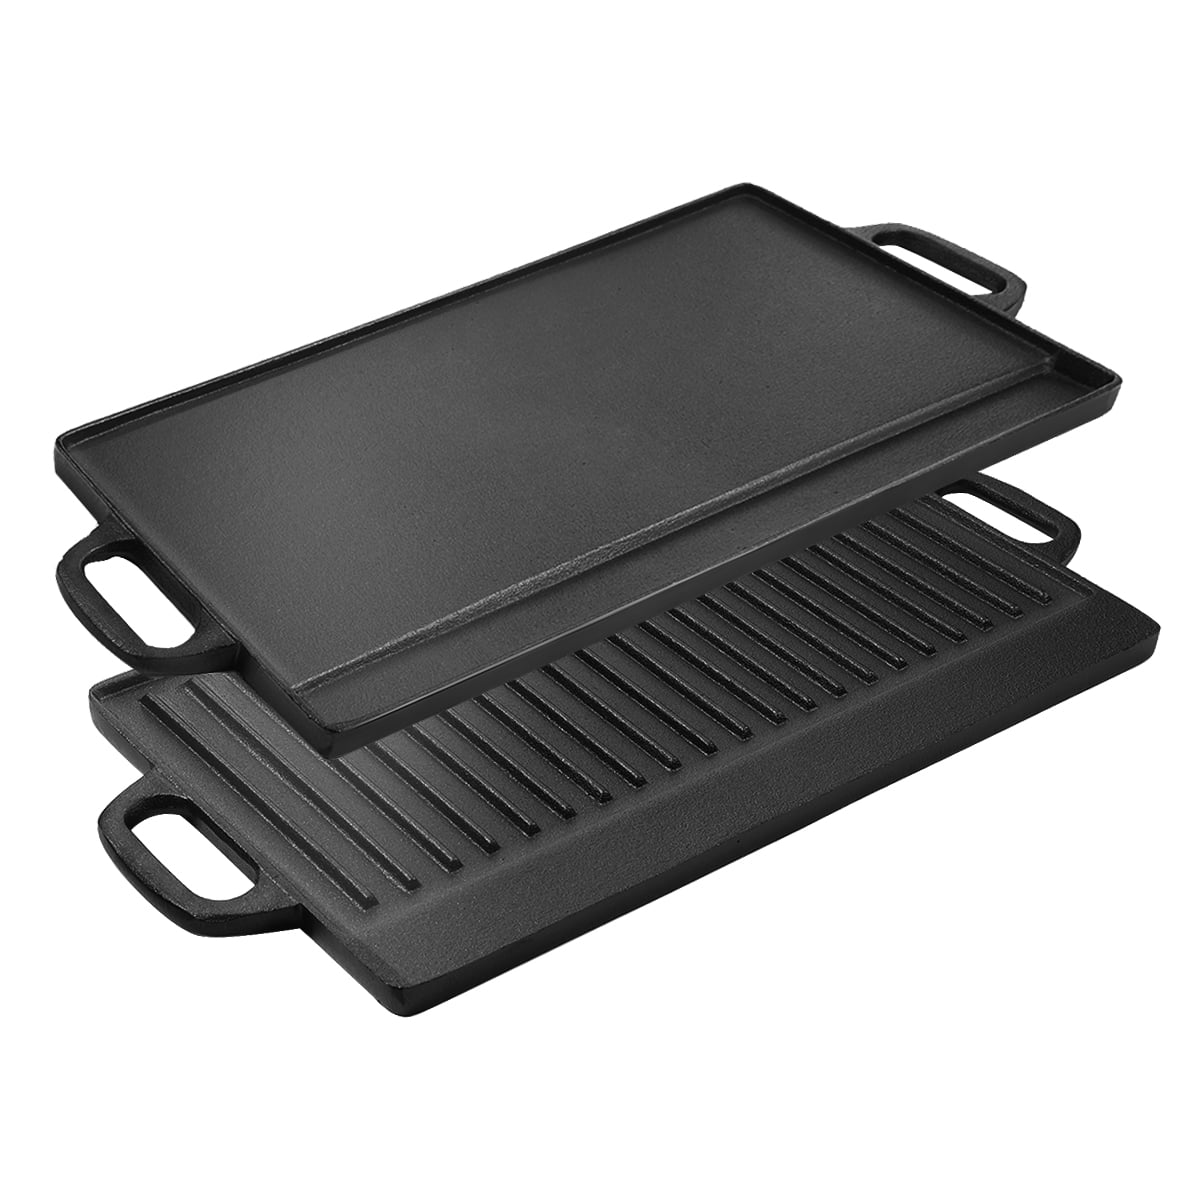 Hisencn Pre-Seasoned Cast Iron Reversible Grill Griddle,13 Inch Griddle Plate for Gas Stovetop with Easy Grip Handles Portable for Indoor Stovetop or Outdoor Camping BBQ 